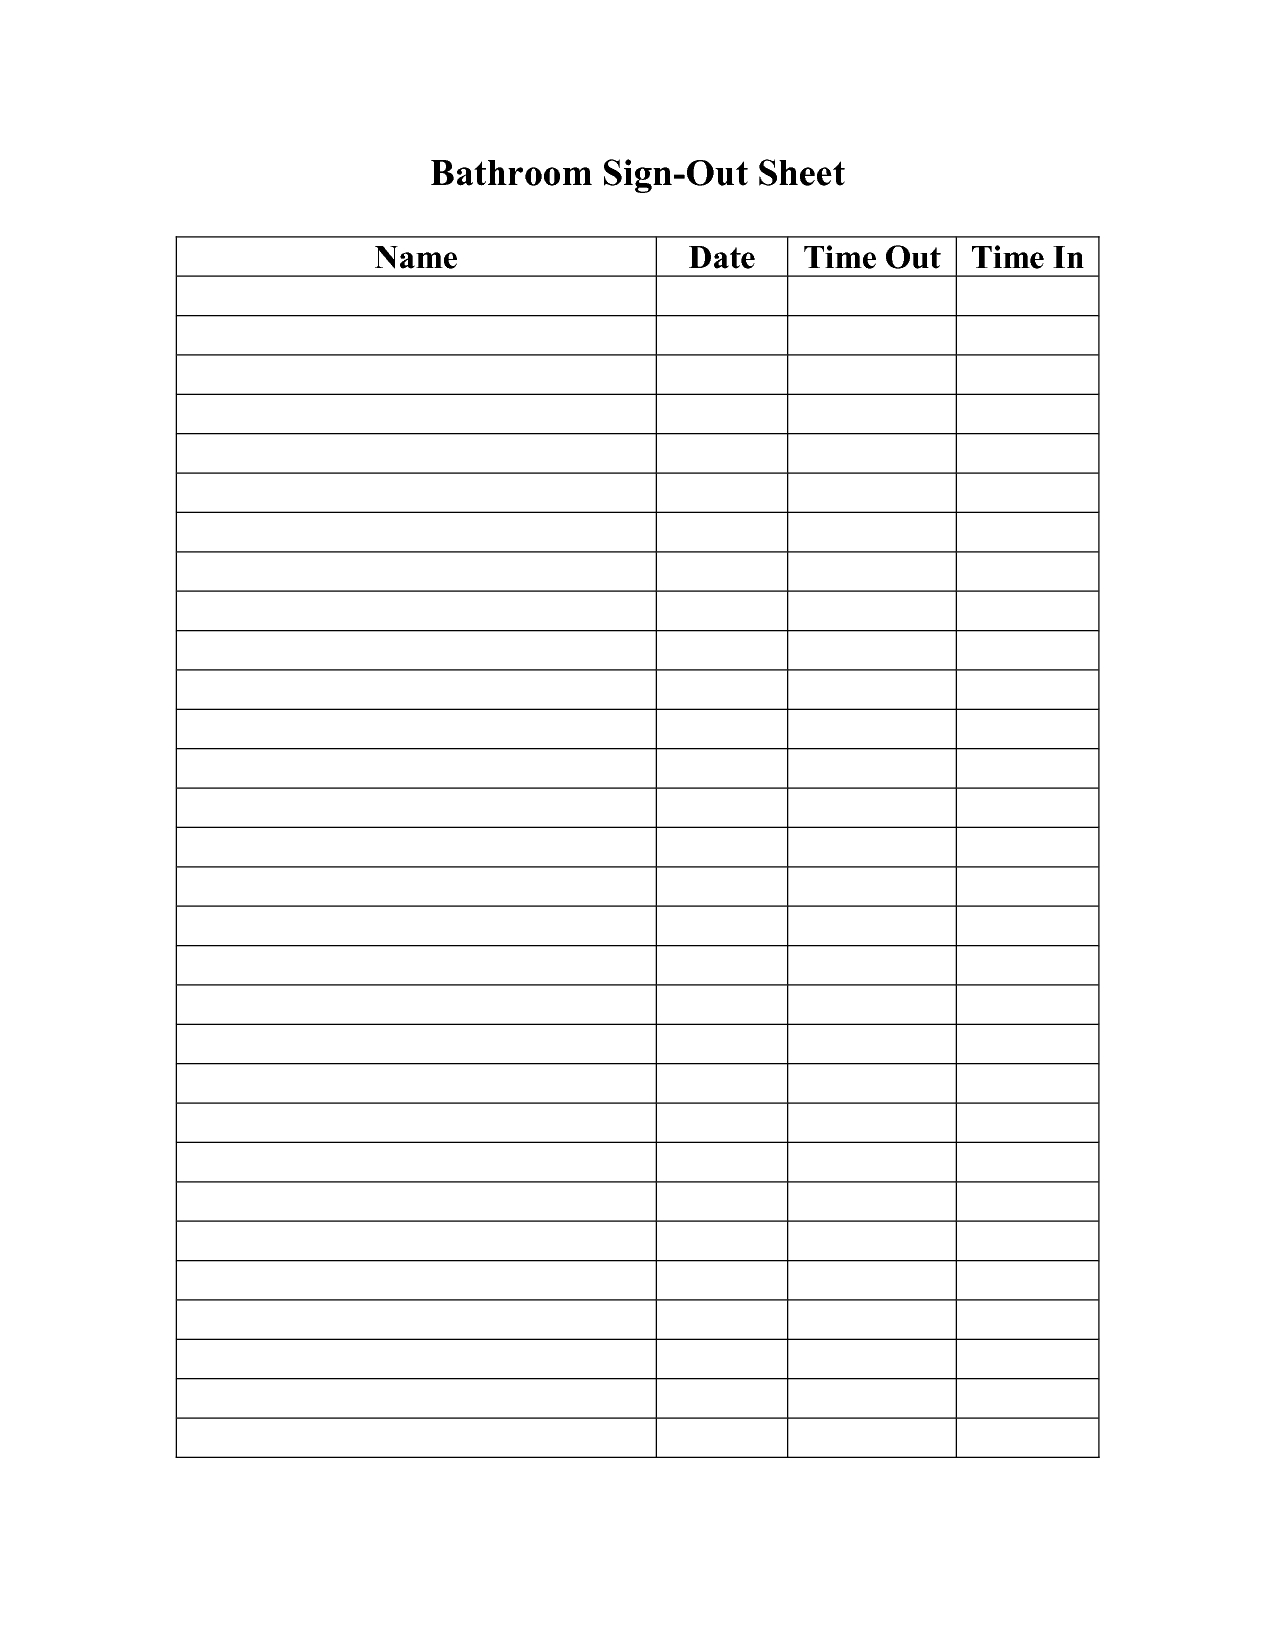 Bathroom+Sign+Out+Sheet+Template | Sign Out Sheet, Bathroom Perky Monthly Sign Up Sheets Printable